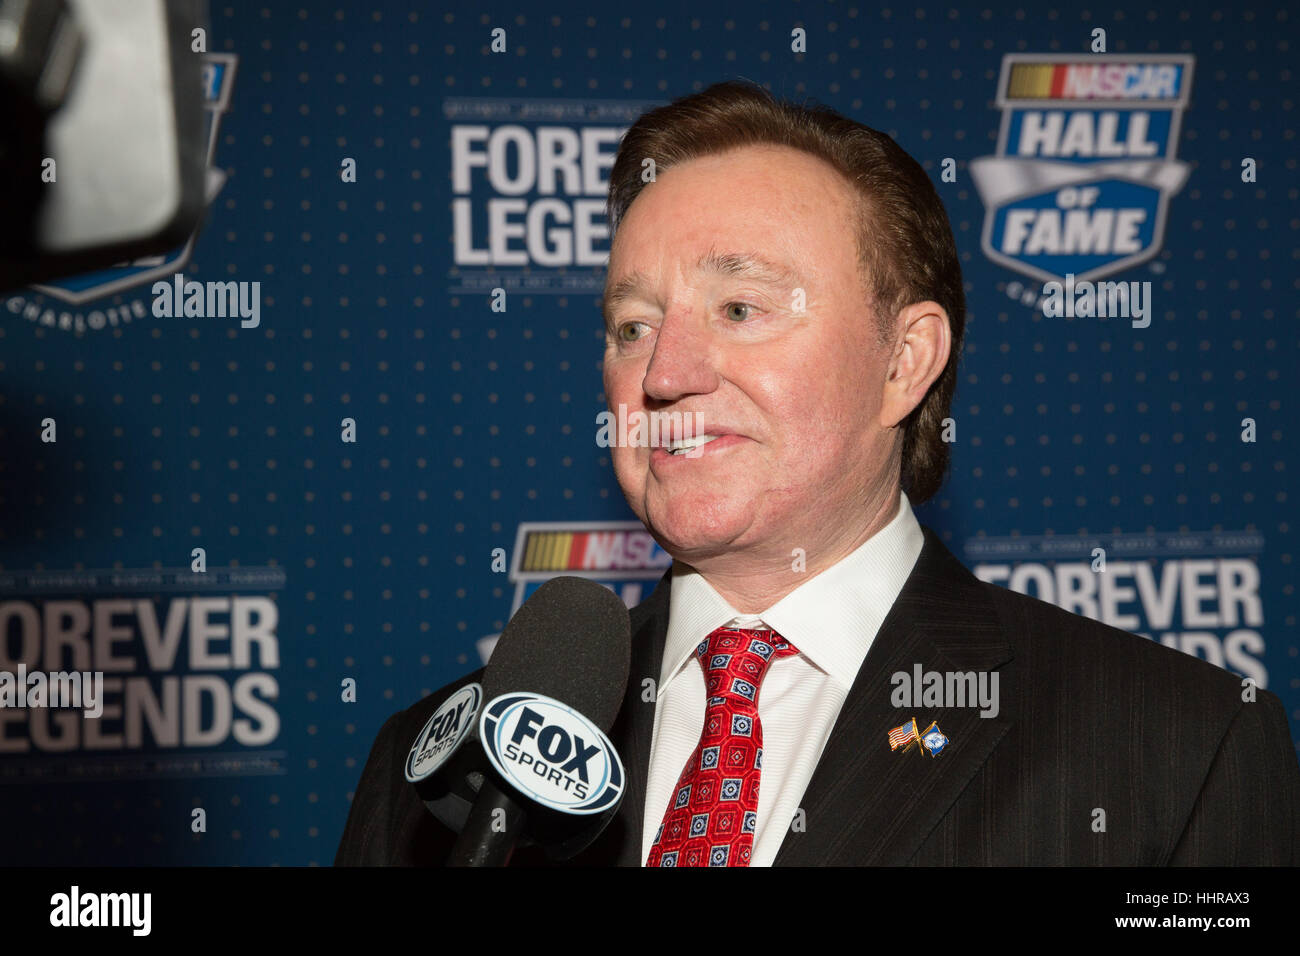 Charlotte, USA. 20th Jan, 2017. Richard Childress on the red carpet at the NASCAR Hall of Fame Induction Ceremony, in Charlotte, North Carolina Richard Childress, Rick Hendrick, Mark Martin, Raymond Parks, and Benny Parsons were inducted into the Hall of Fame. Credit: Jason Walle/ZUMA Wire/Alamy Live News Stock Photo